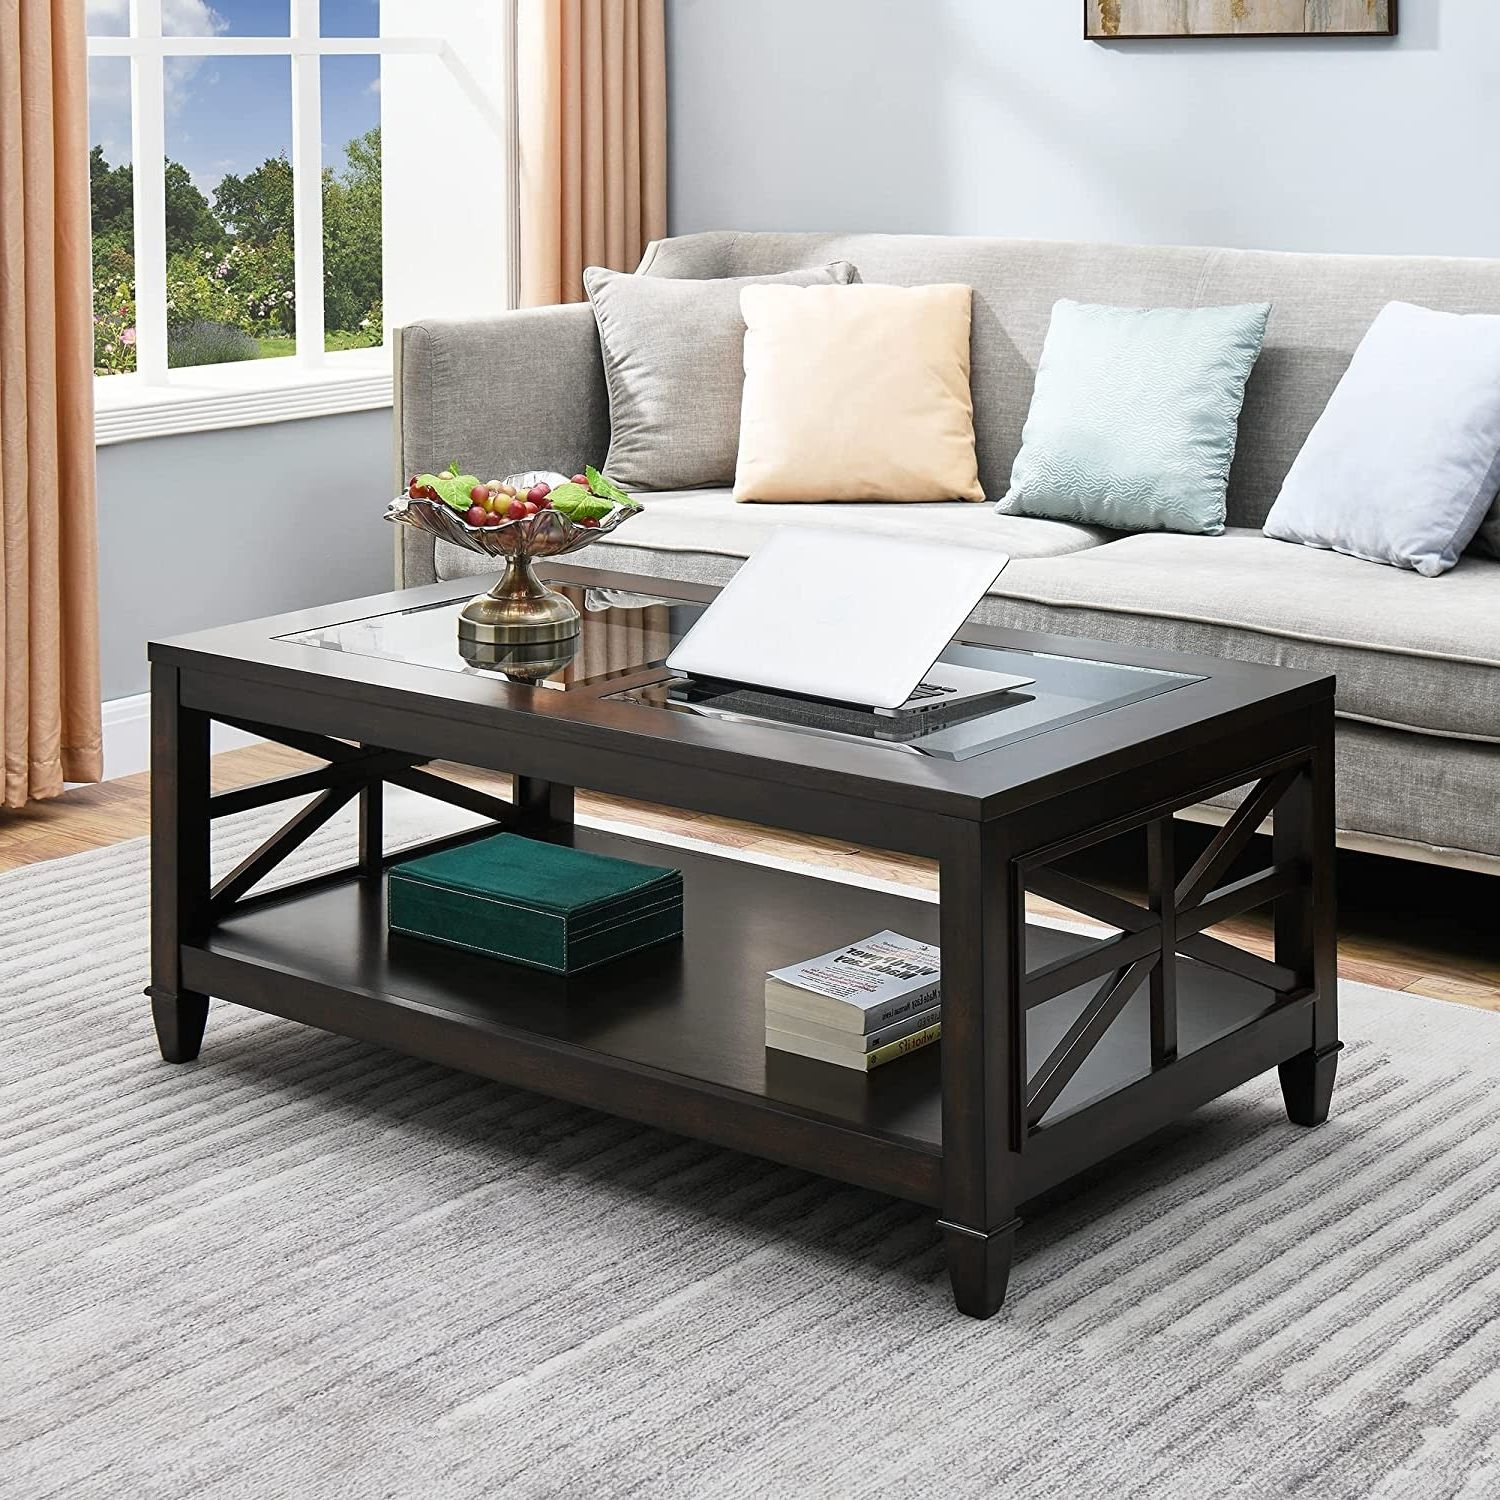 2019 2 Tier 45.5" X 26" Solid Wood Coffee Table Tempered Glass Top – On Sale –  Bed Bath & Beyond – 36540528 Intended For Wood Tempered Glass Top Coffee Tables (Photo 10 of 10)